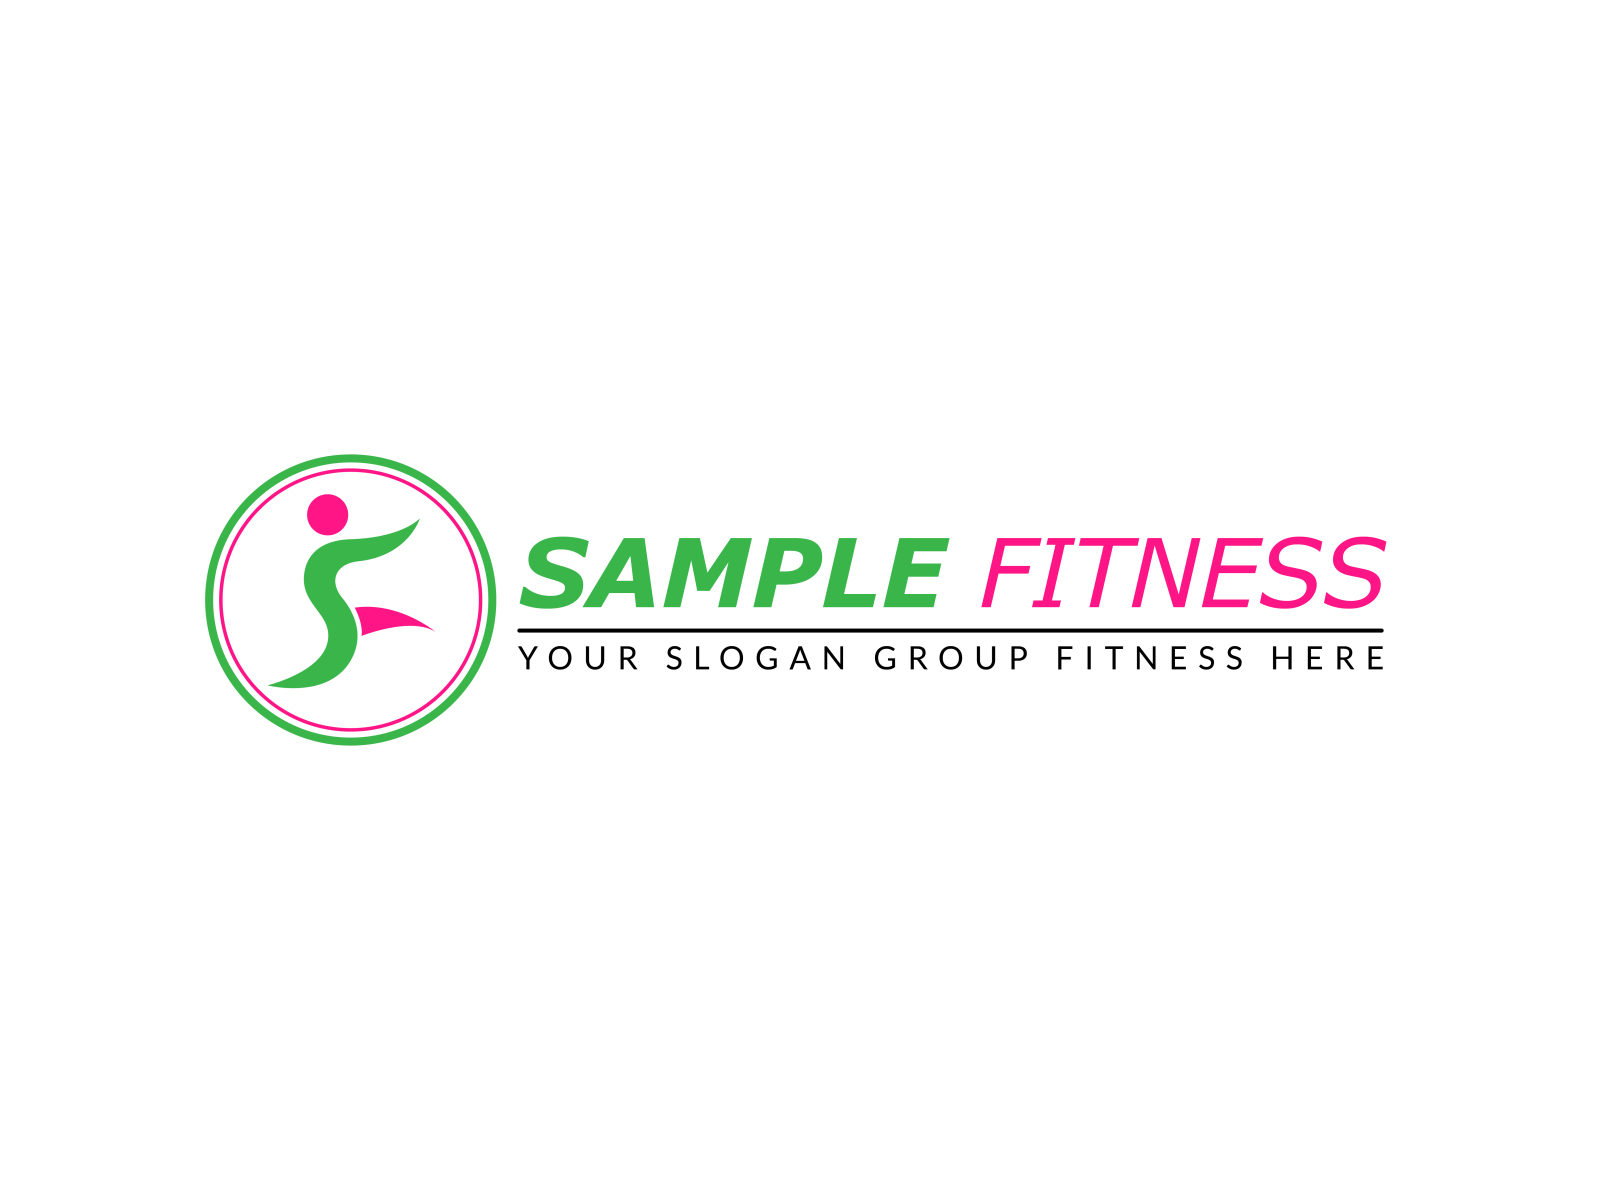 Fitness Place Logo 1 by Mustofa Bayu on Dribbble